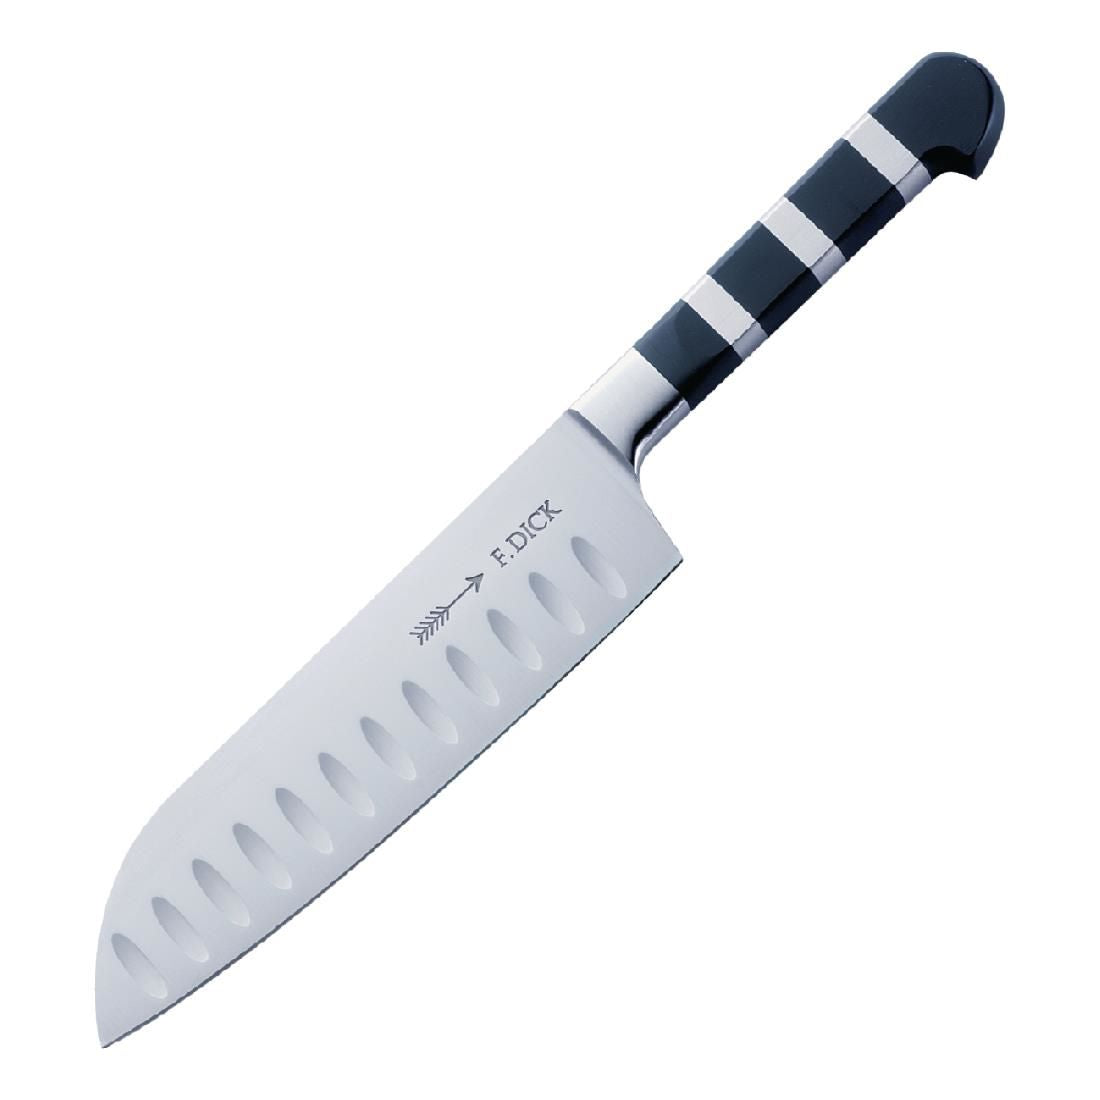 DL318 Dick 1905 Fully Forged Santoku Knife 18cm JD Catering Equipment Solutions Ltd